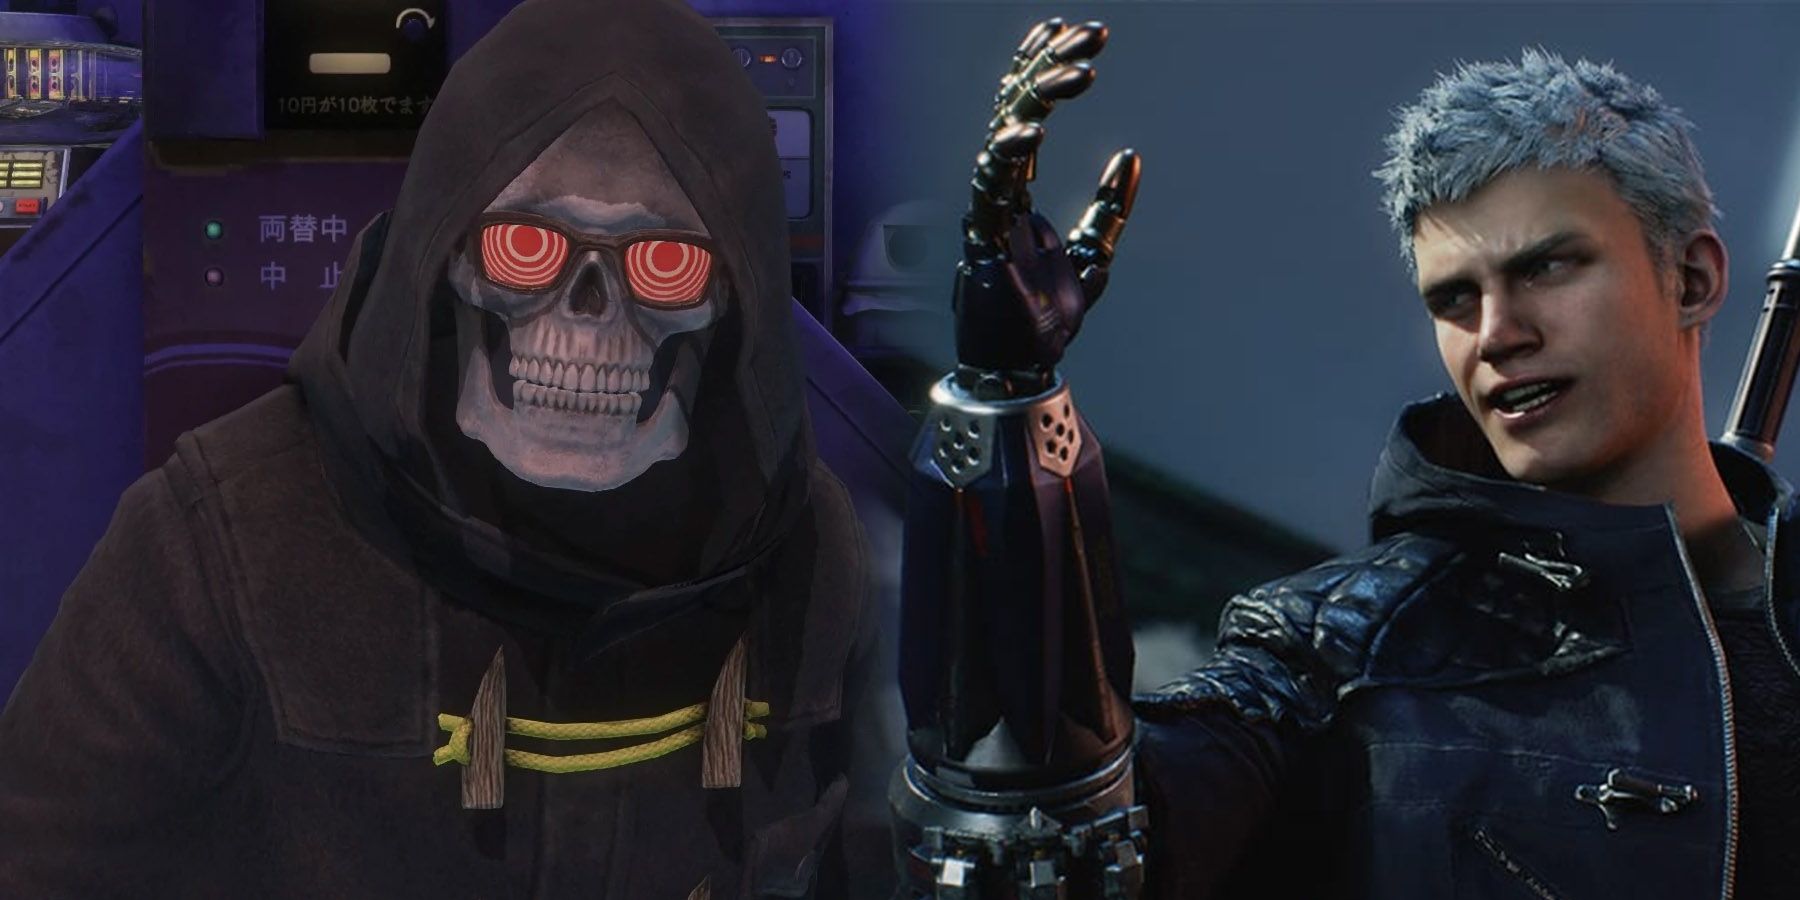 Games That Punish Hoarding Header Image Showing Uncle Death From Let It Die And Nero From DMC5